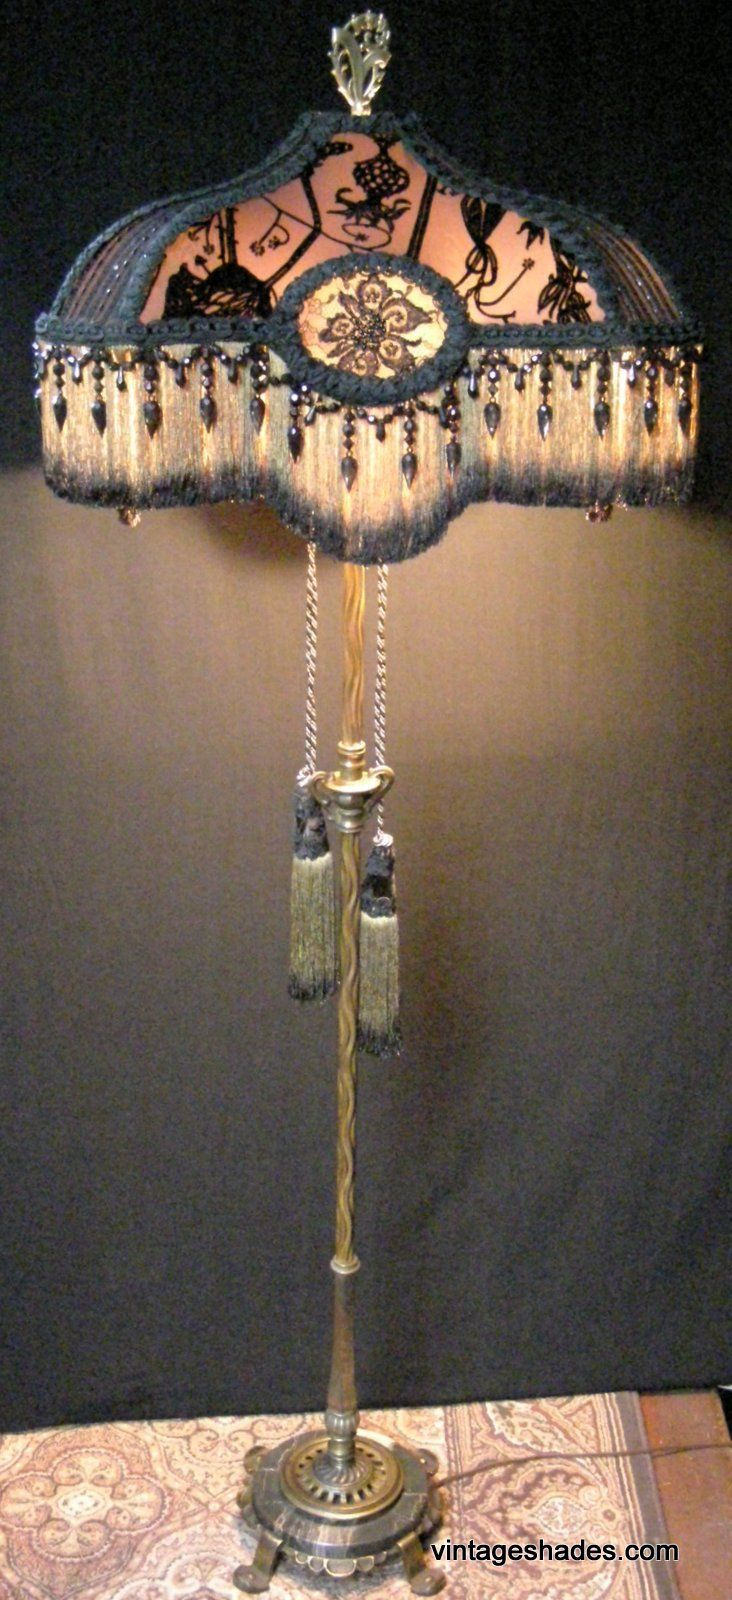 This Lamp Is An Amazing Antique Rembrandt Floor Lamp Made throughout sizing 732 X 1600